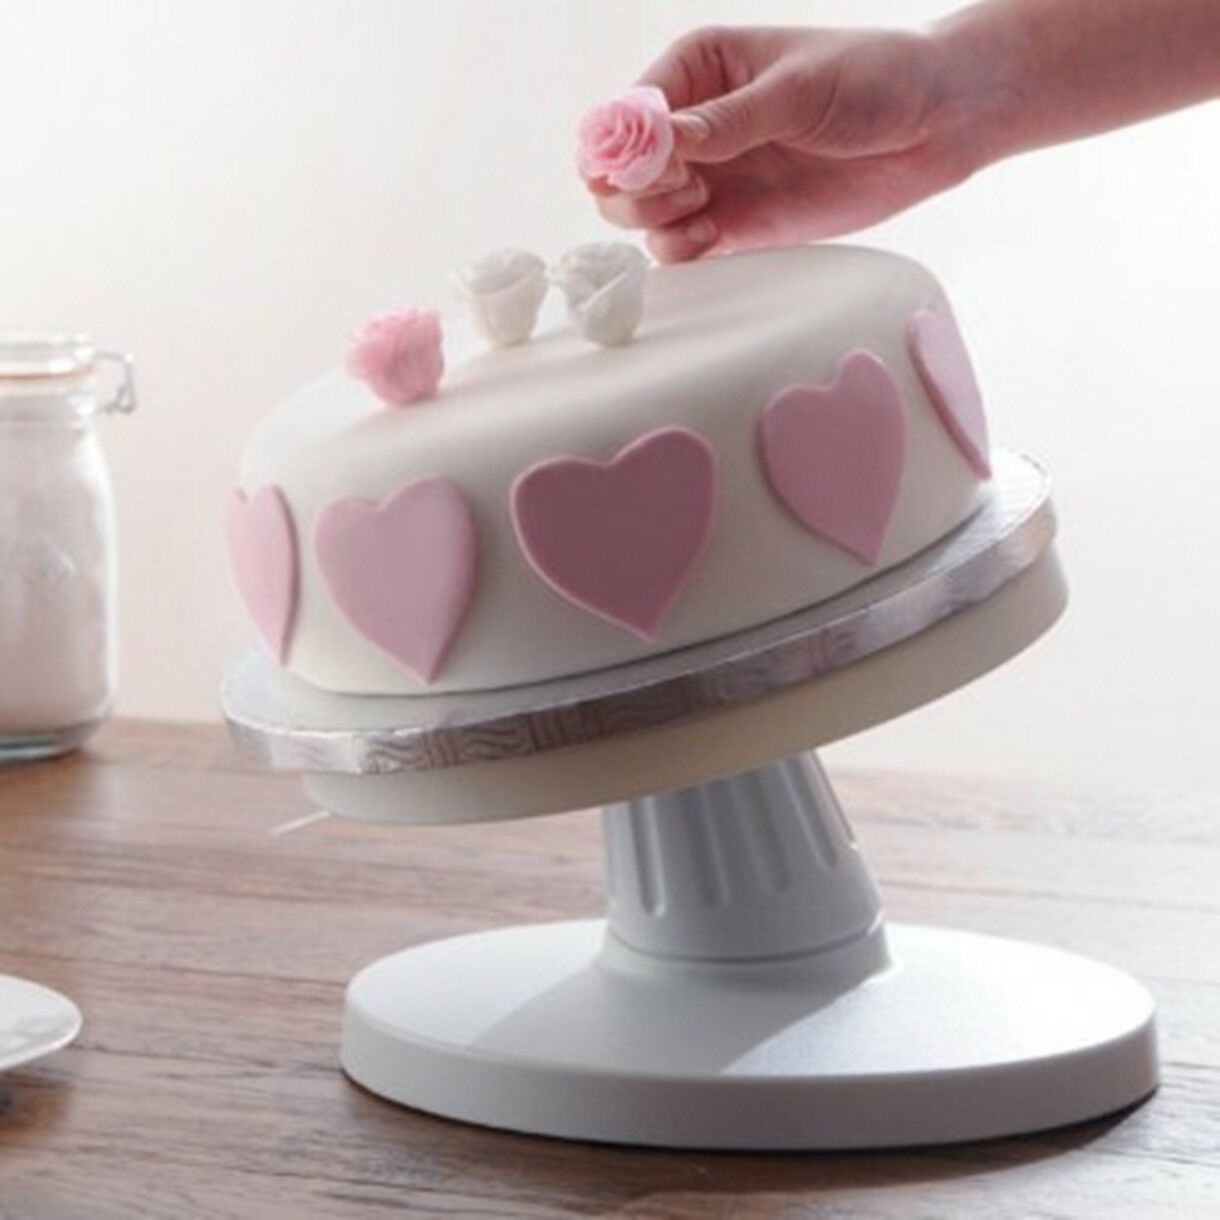 attachment-https://www.cupcakeaddicts.co.uk/wp-content/uploads/imported/0/TURNTABLE-CAKE-DECORATING-ICING-TILTING-23CM-or-28CM-ROTATING-DISPLAY-STAND-323107311220.jpg